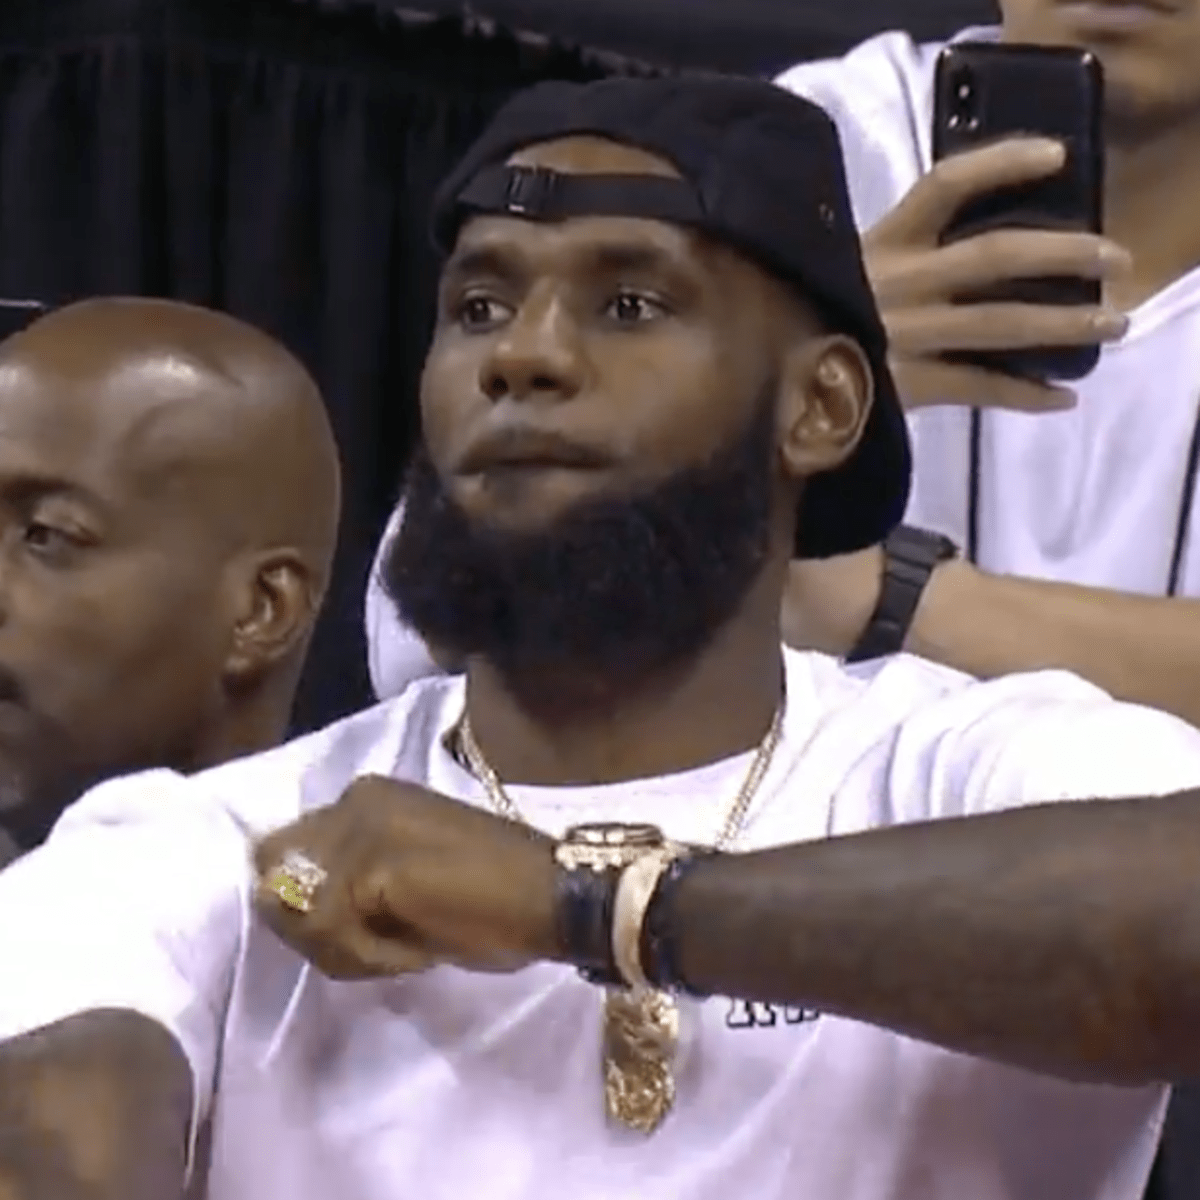 LeBron James wore $500 Lakers shorts to an NBA Summer League game